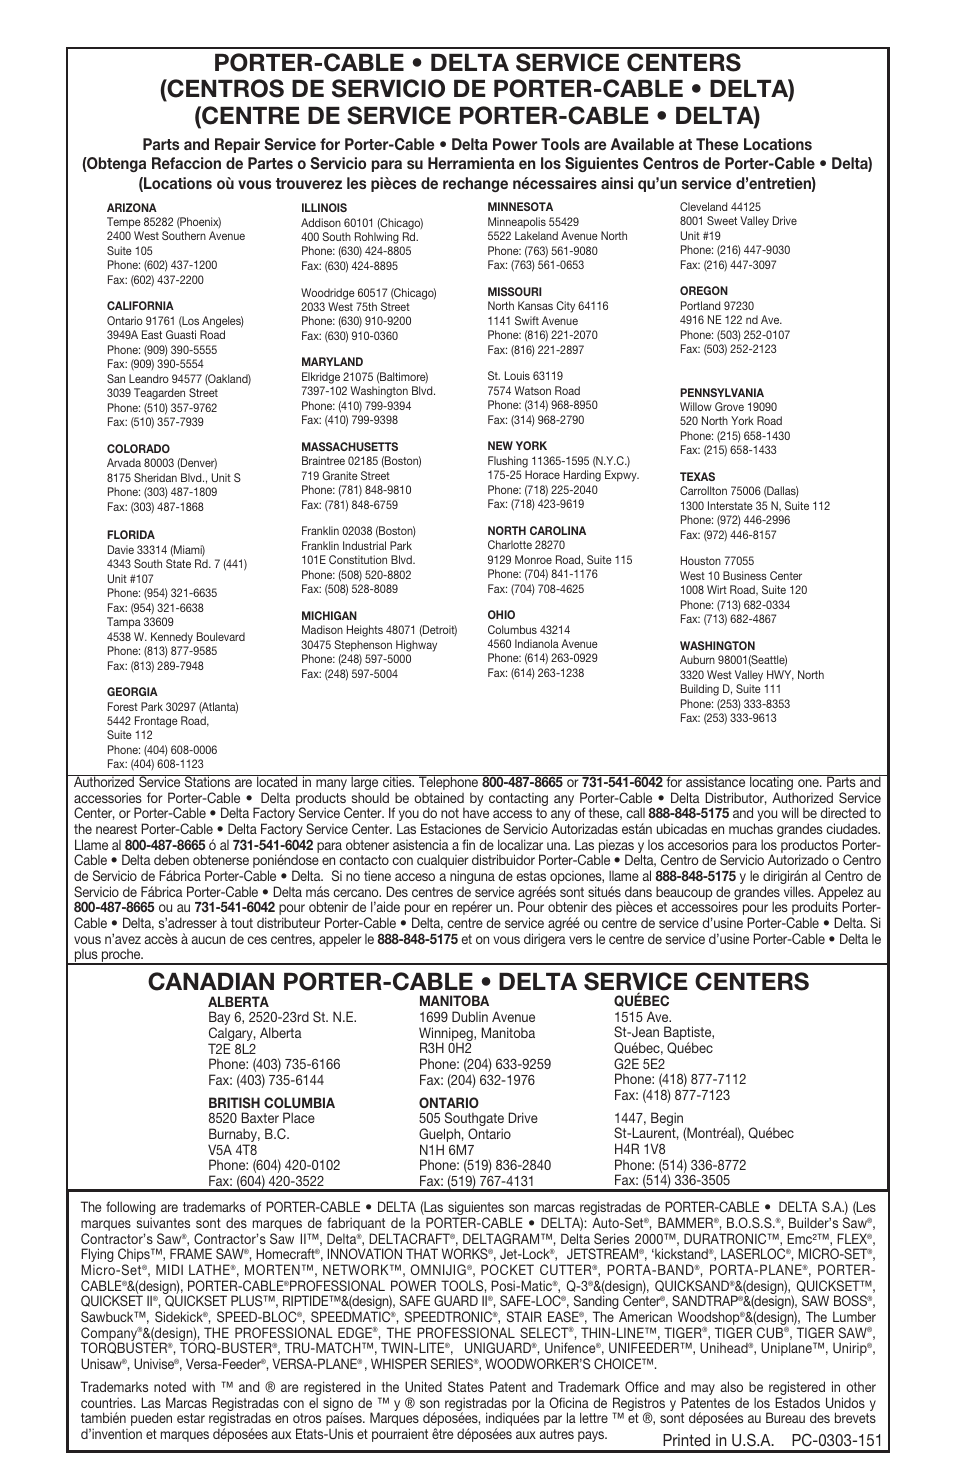 Canadian porter-cable • delta service centers | Porter-Cable FN250A